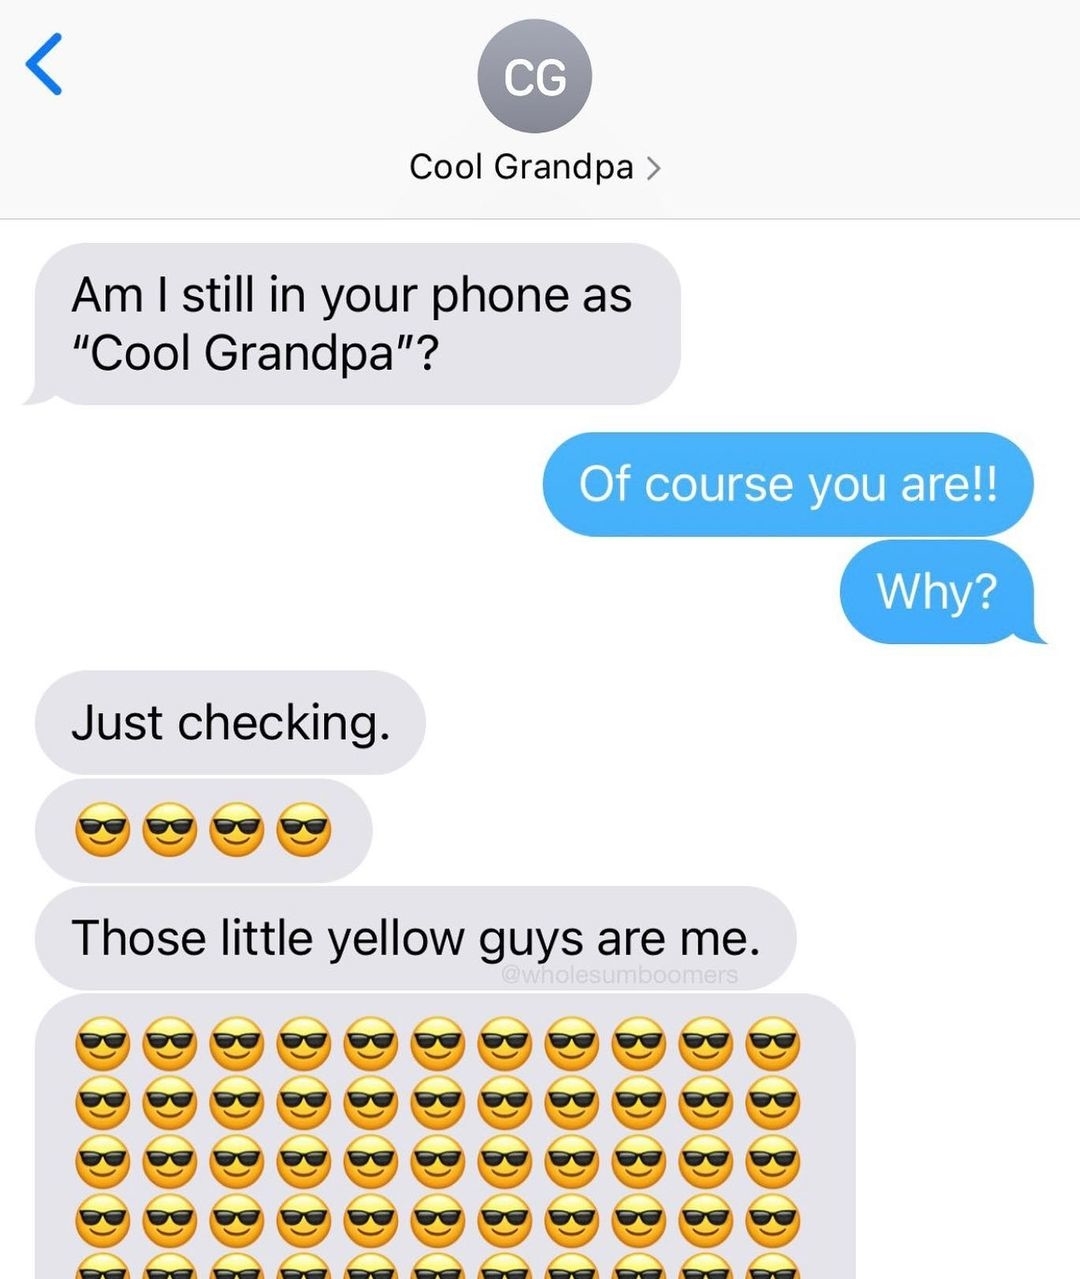 &quot;Am I still in your phone as &#x27;Cool Grandpa&#x27;?&quot; &quot;Of course you are, why?&quot; &quot;Just checking&quot; and &quot;Those little yellow guys are me,&quot; followed by rows of smiley face emojis wearing sunglasses